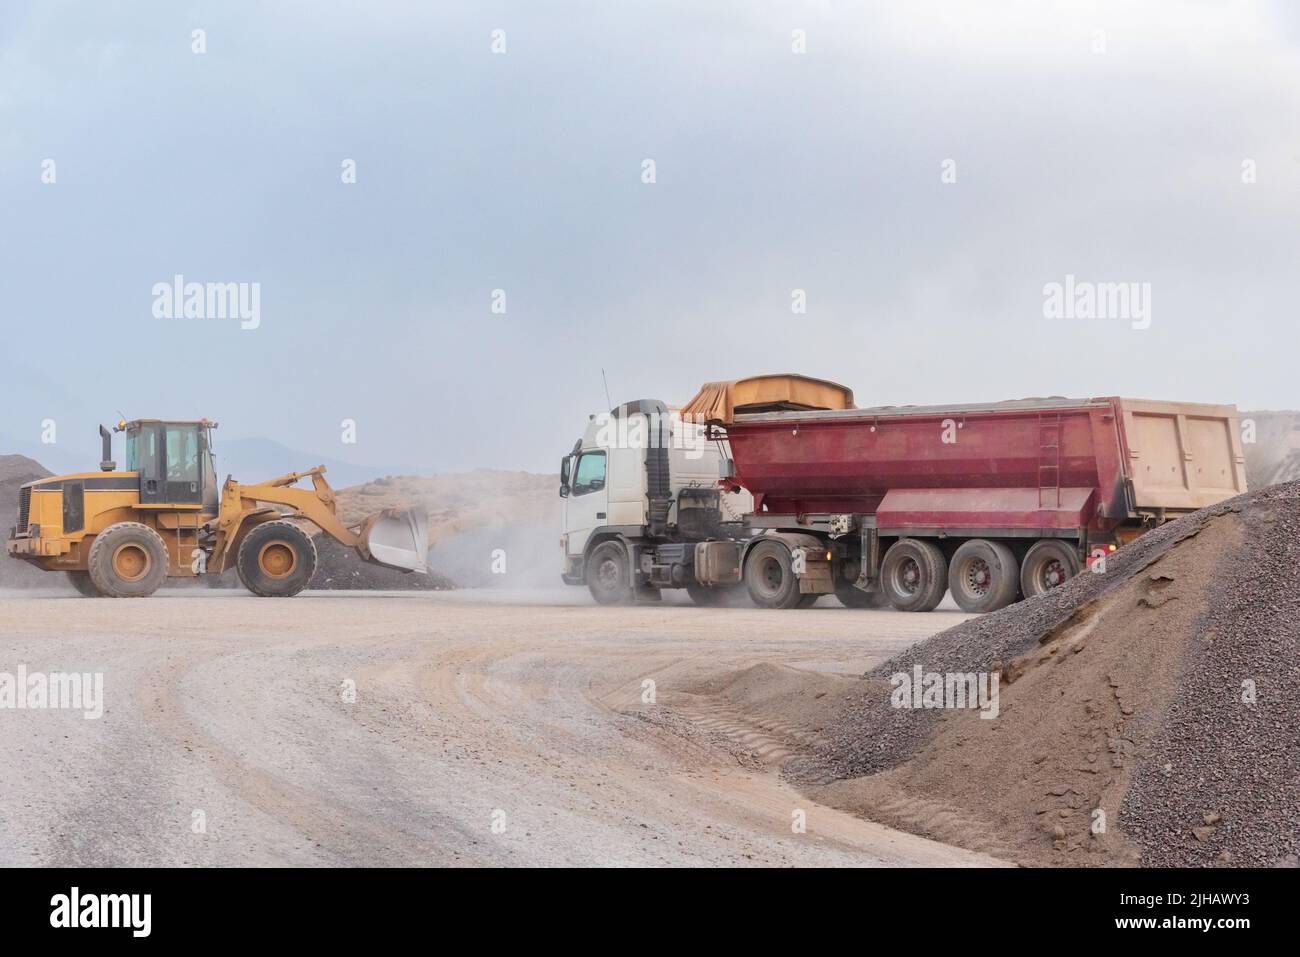 Excavator shovel loading a dump truck in a quarry Stock Photo